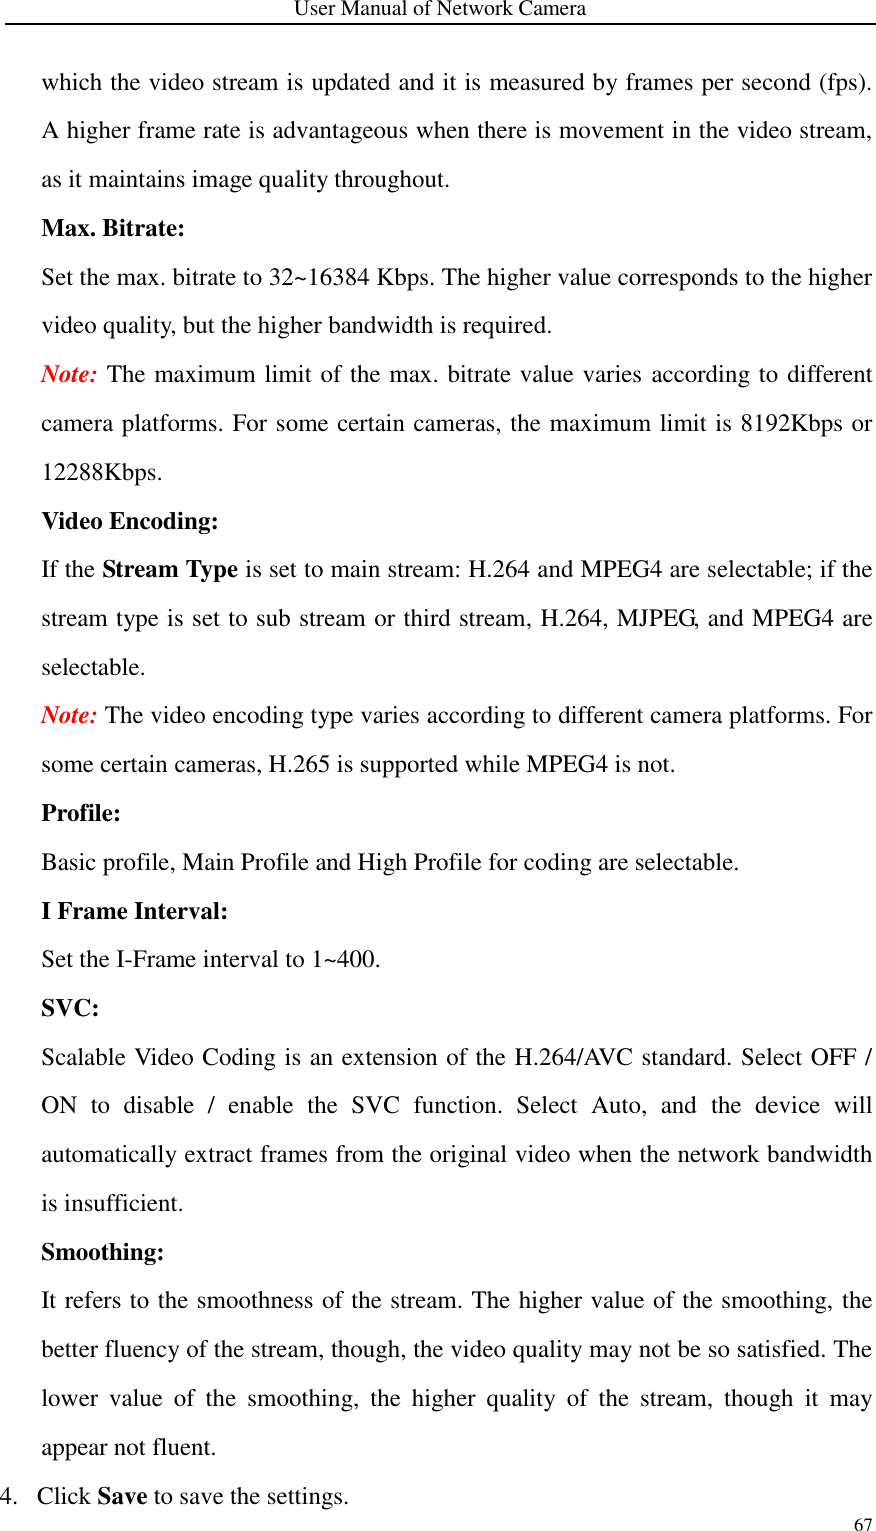 User Manual of Network Camera 67  which the video stream is updated and it is measured by frames per second (fps). A higher frame rate is advantageous when there is movement in the video stream, as it maintains image quality throughout. Max. Bitrate:   Set the max. bitrate to 32~16384 Kbps. The higher value corresponds to the higher video quality, but the higher bandwidth is required. Note: The maximum limit of the max. bitrate value varies according to different camera platforms. For some certain cameras, the maximum limit is 8192Kbps or 12288Kbps. Video Encoding:   If the Stream Type is set to main stream: H.264 and MPEG4 are selectable; if the stream type is set to sub stream or third stream, H.264, MJPEG, and MPEG4 are selectable. Note: The video encoding type varies according to different camera platforms. For some certain cameras, H.265 is supported while MPEG4 is not. Profile:   Basic profile, Main Profile and High Profile for coding are selectable. I Frame Interval:   Set the I-Frame interval to 1~400. SVC:   Scalable Video Coding is an extension of the H.264/AVC standard. Select OFF / ON  to  disable  /  enable  the  SVC  function.  Select  Auto,  and  the  device  will automatically extract frames from the original video when the network bandwidth is insufficient. Smoothing: It refers to the smoothness of the stream. The higher value of the smoothing, the better fluency of the stream, though, the video quality may not be so satisfied. The lower  value  of  the  smoothing,  the  higher  quality  of  the  stream,  though  it  may appear not fluent. 4. Click Save to save the settings. 